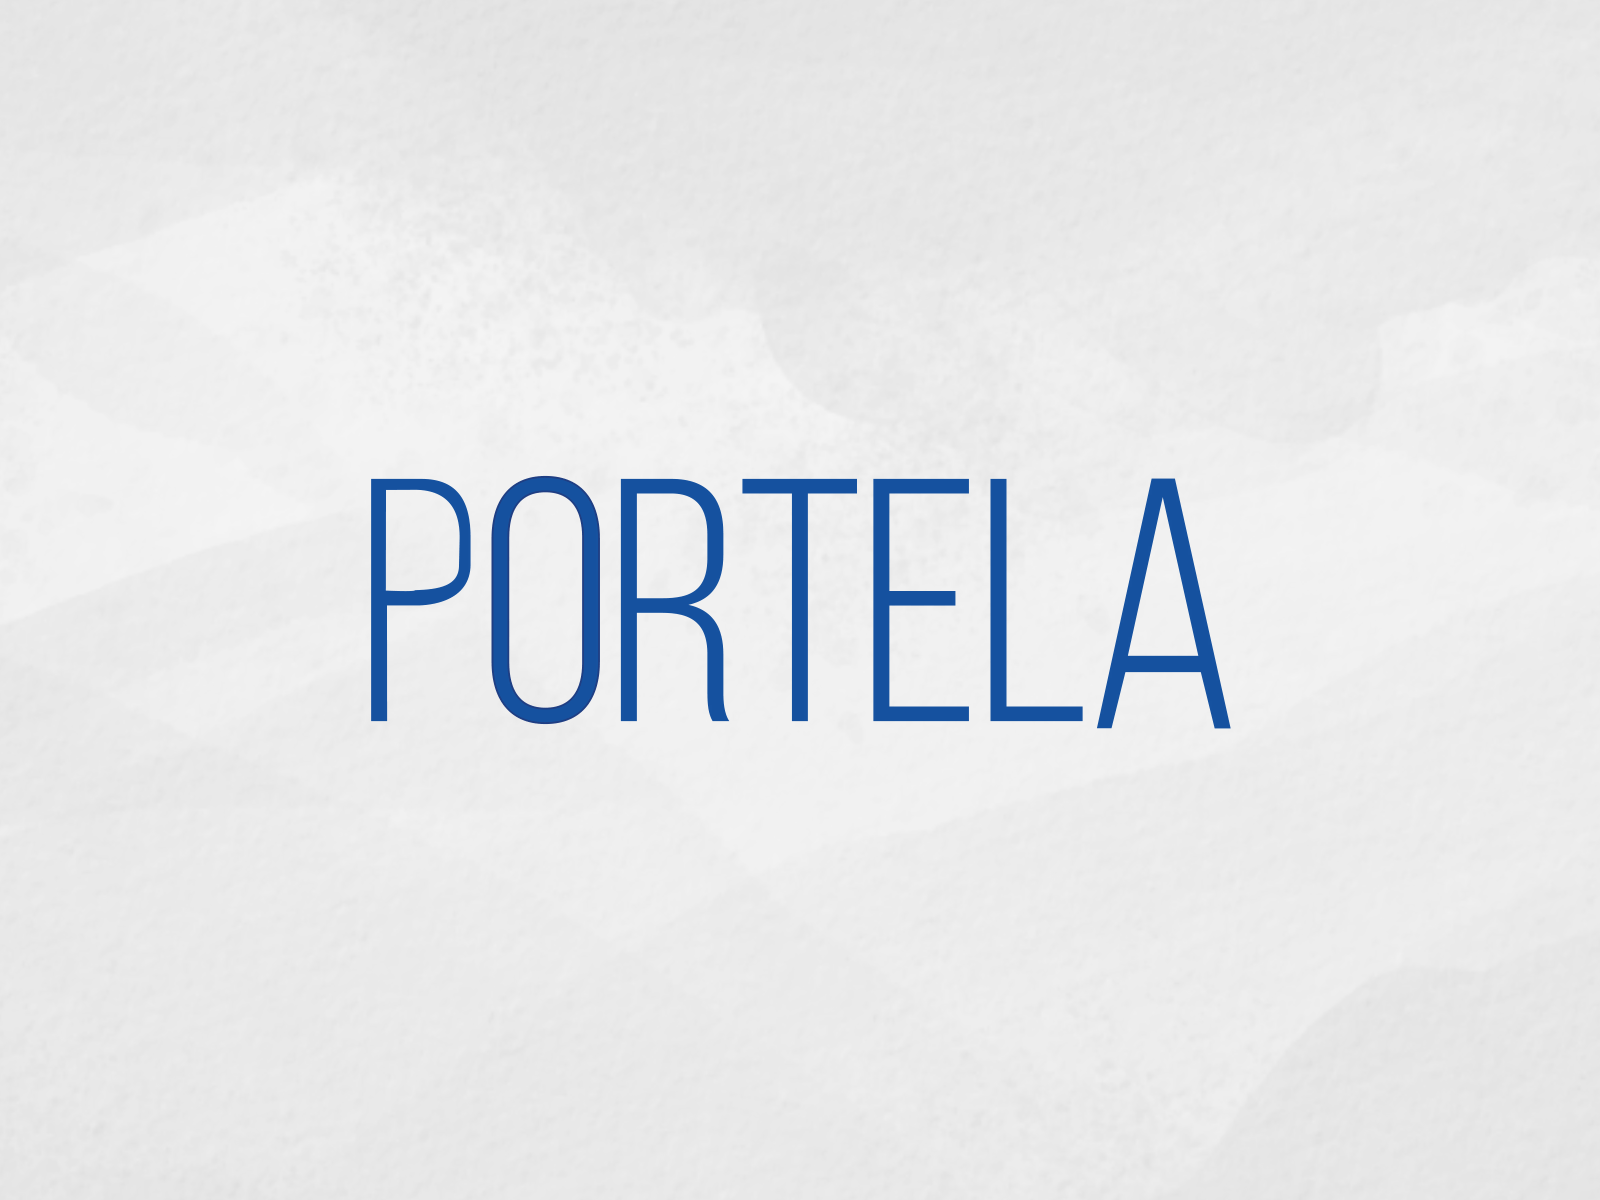 Stretched Text - Portela aftereffects animation motion design stretched text typography